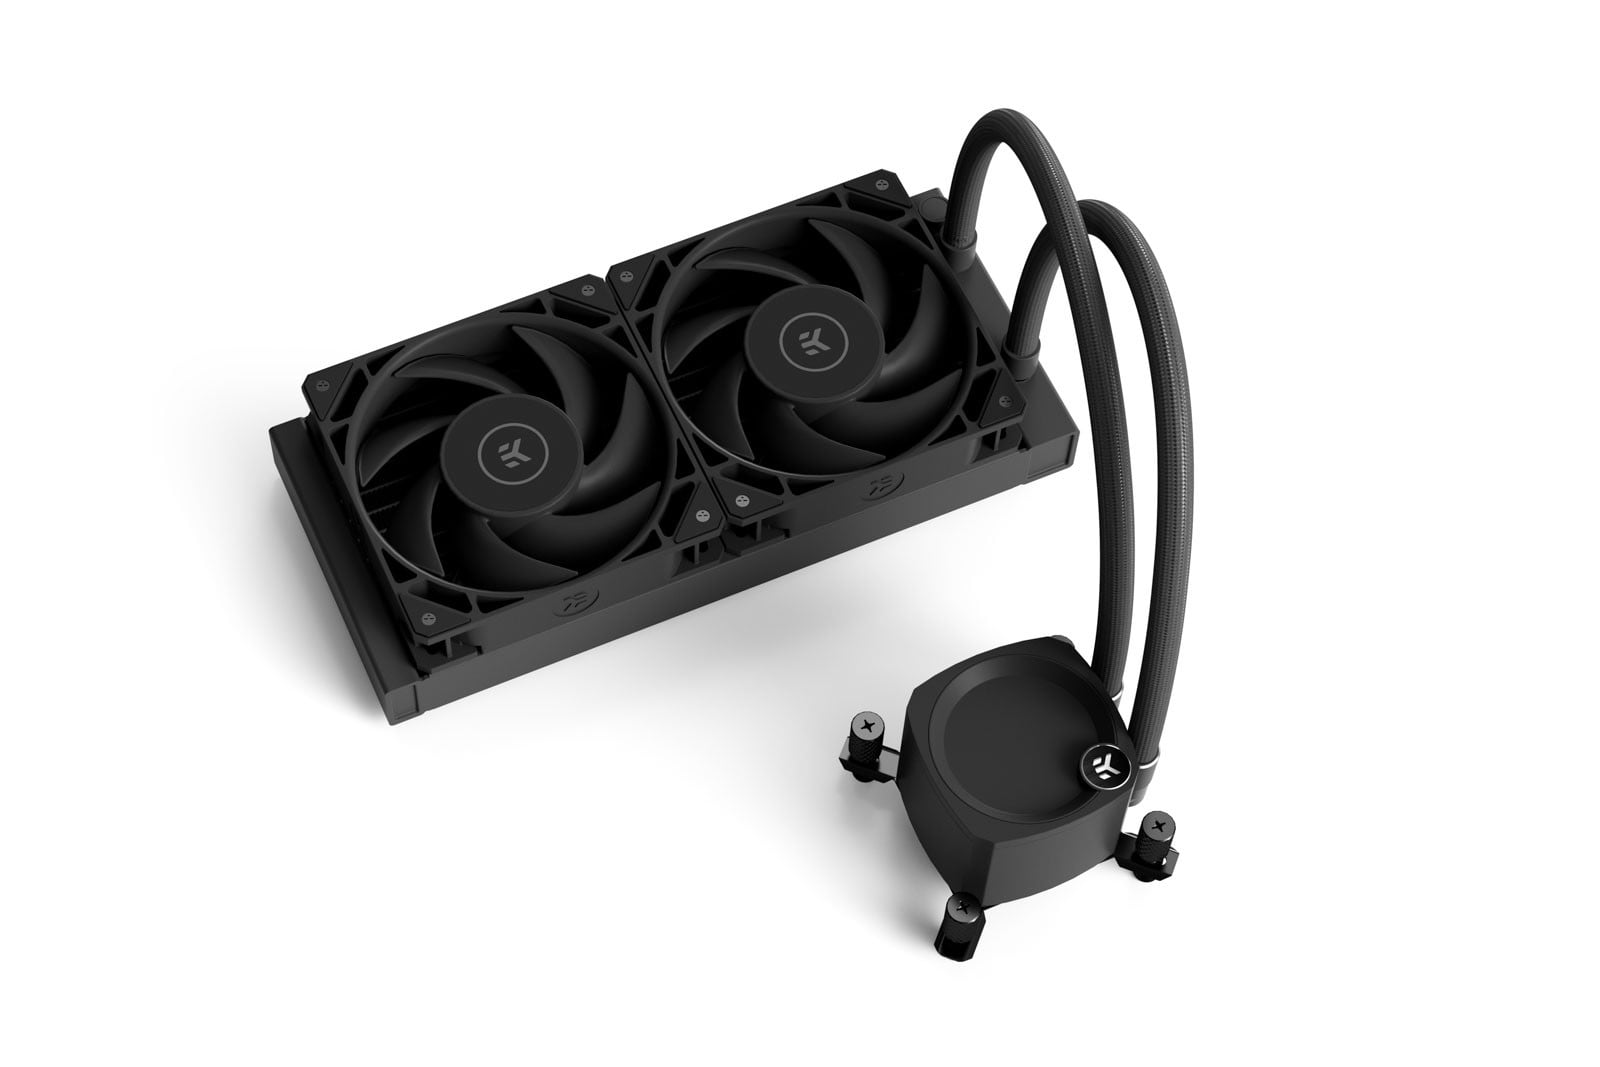 EK-Nucleus AIO CR240 Lux D-RGB, Dark - 240 mm All-in-One Liquid CPU Cooler  with EK FPT Fans, Water Cooling Computer Parts, 120mm Fan, Compatible with  Latest Intel & AMD CPUs 